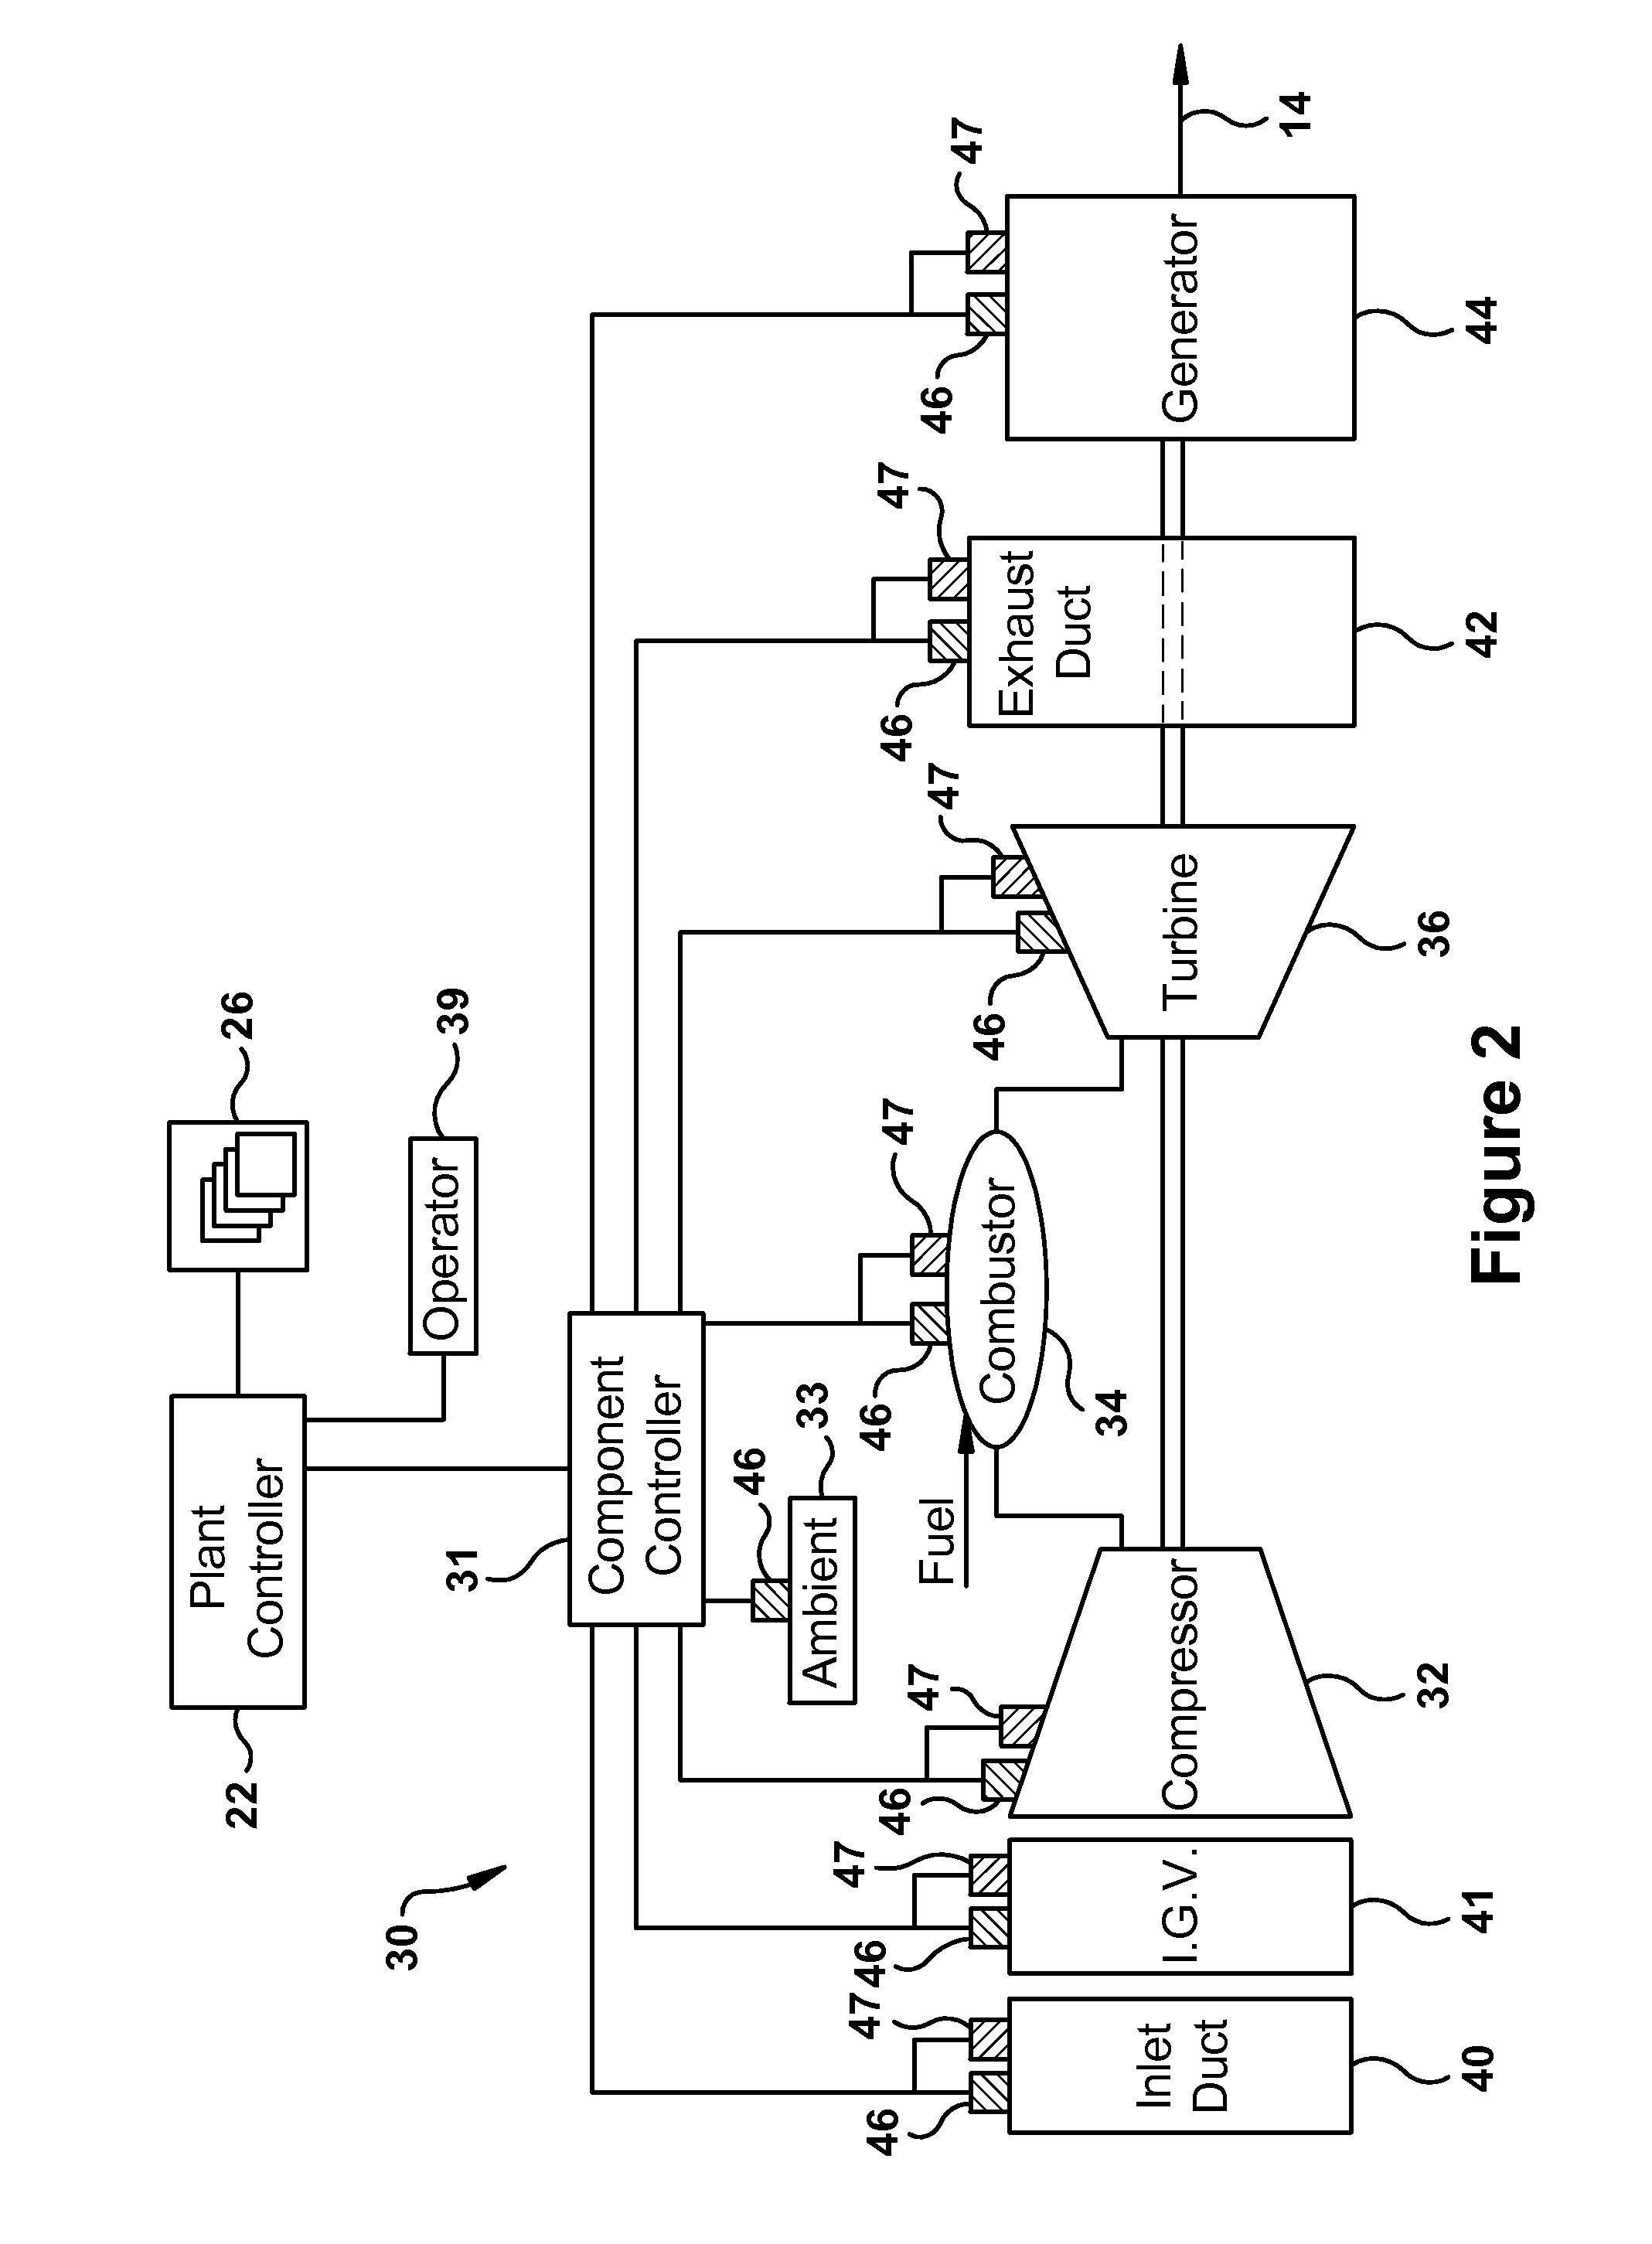 Methods and systems for enhancing control of power plant generating units